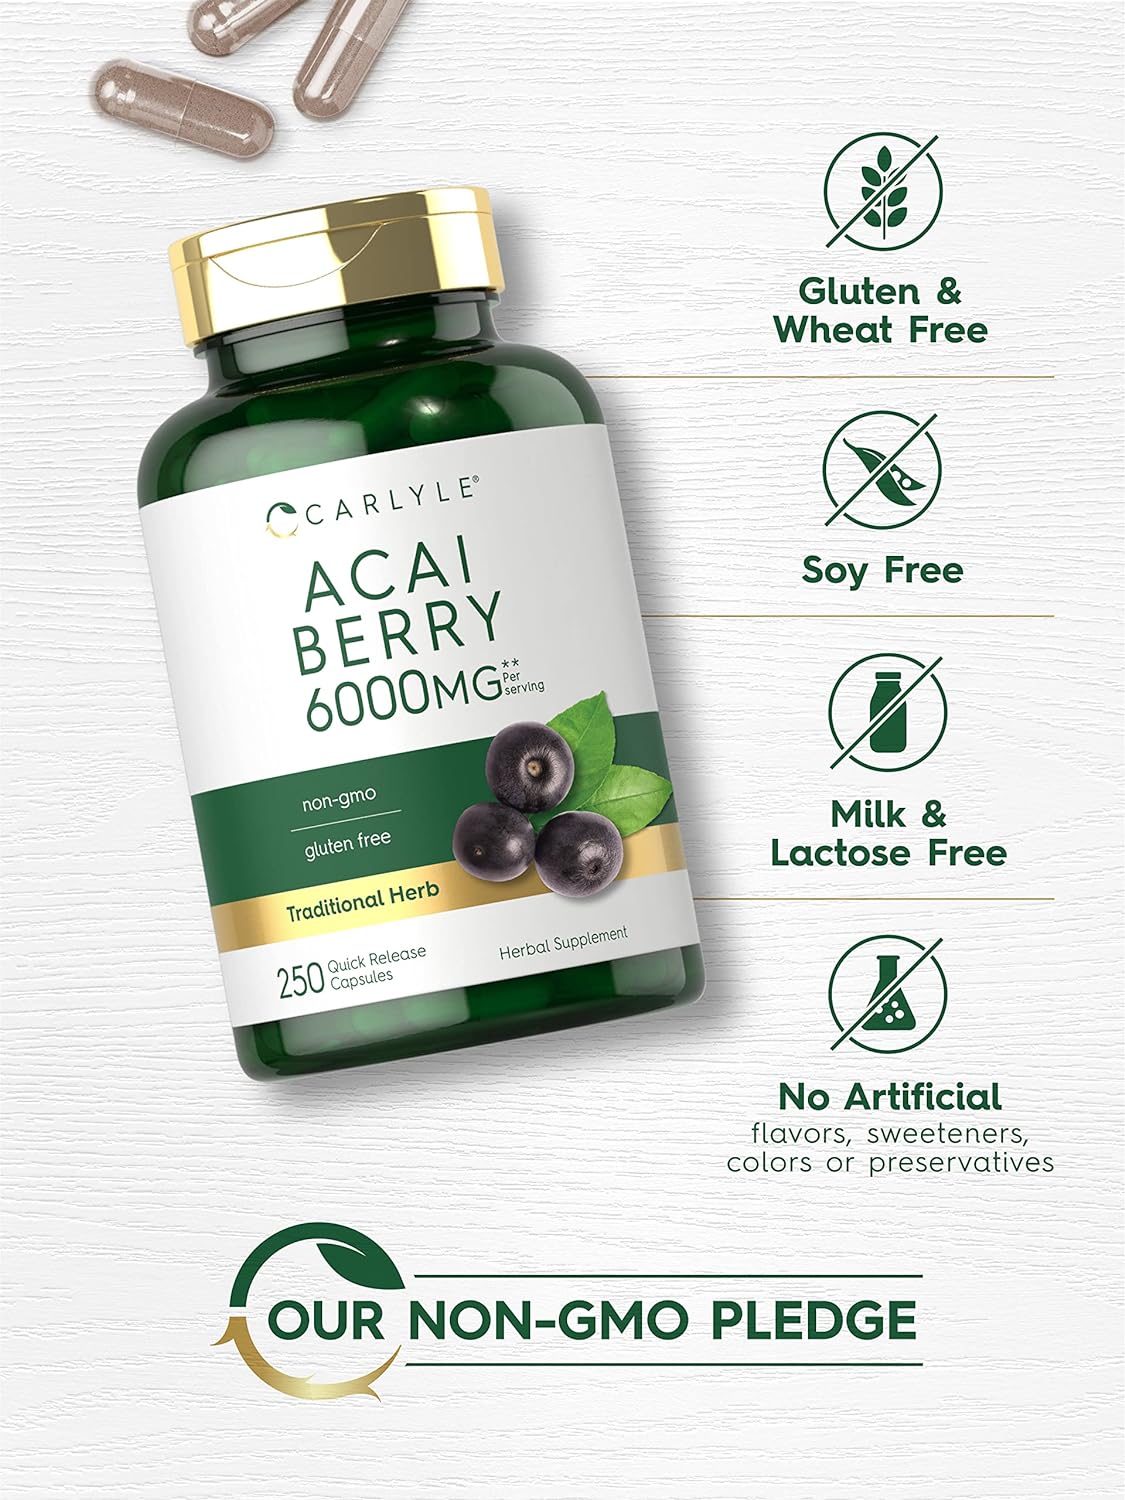 Carlyle Acai Berry Capsules 6000mg | 250 Count | Non-GMO & Gluten Free Acai Berry Extract : Health & Household